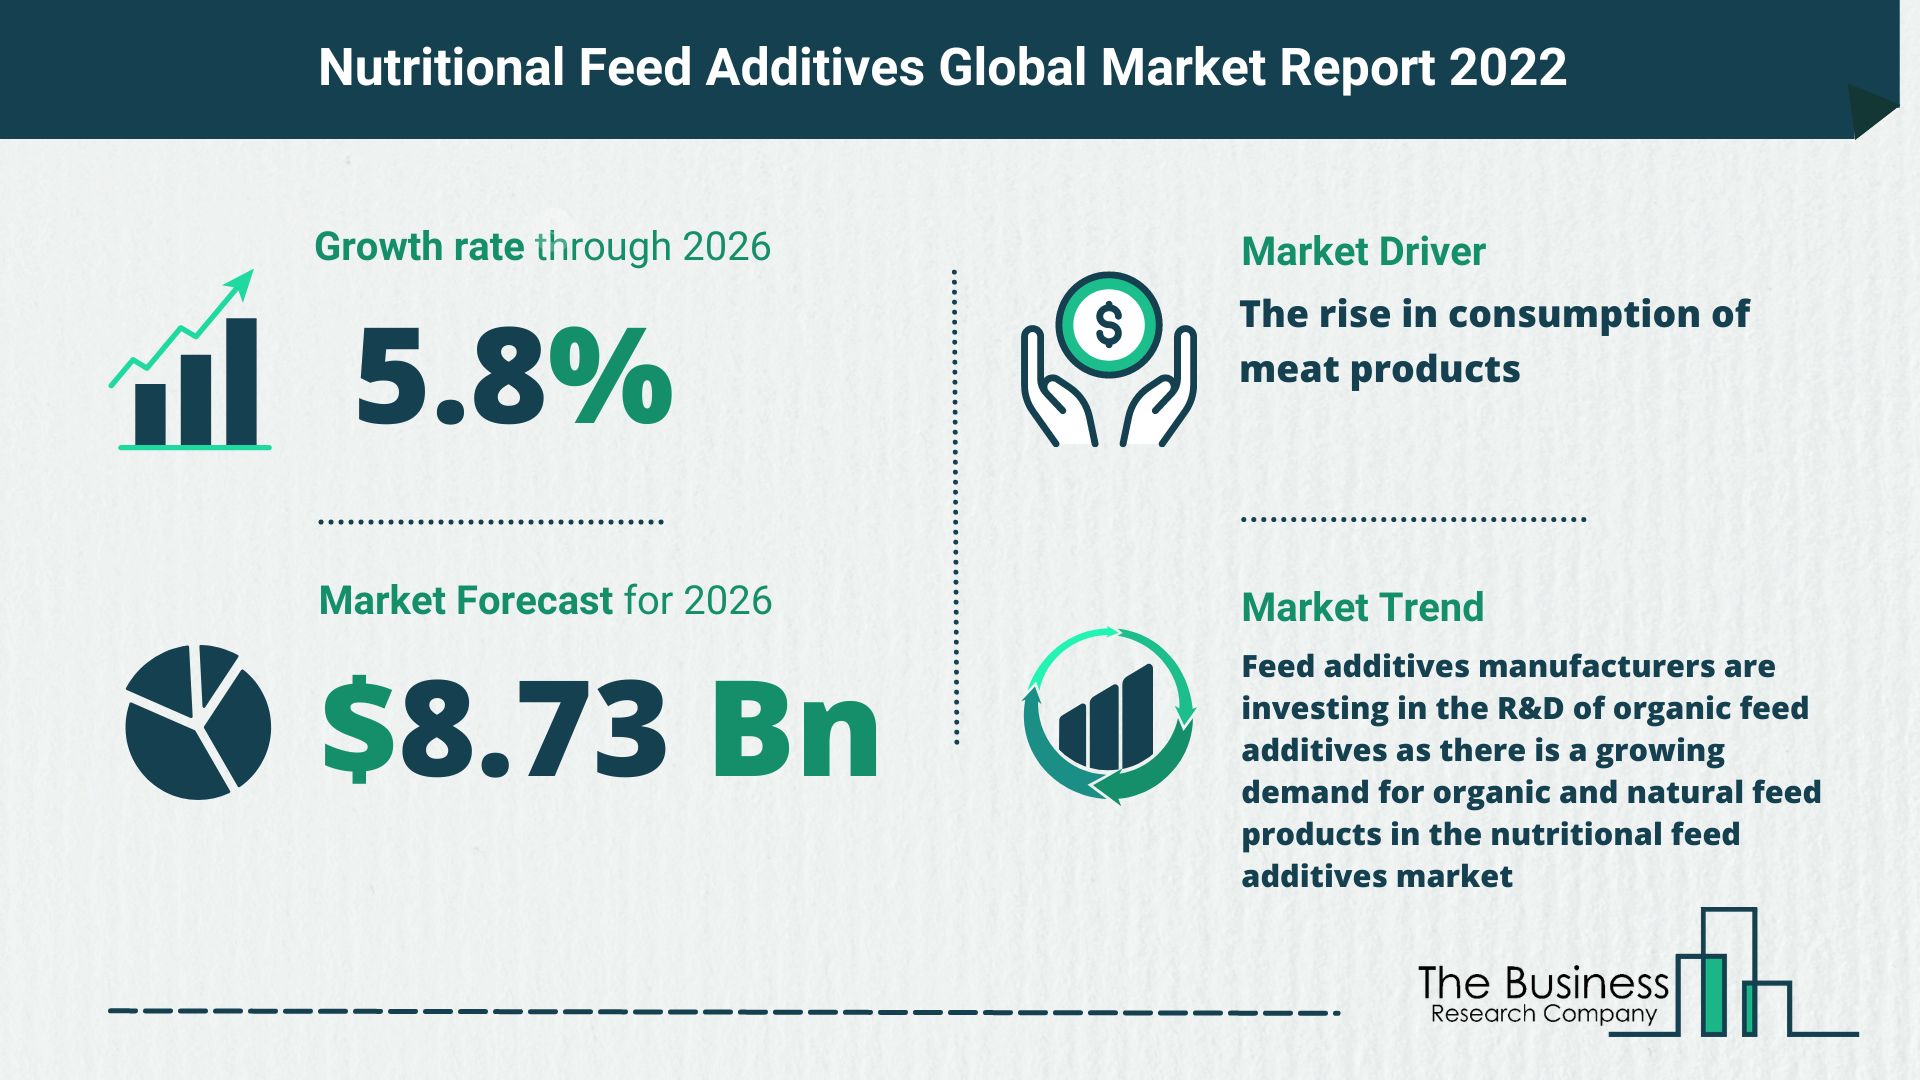 Latest Nutritional Feed Additives Market Growth Study 2022-2026 By The Business Research Company